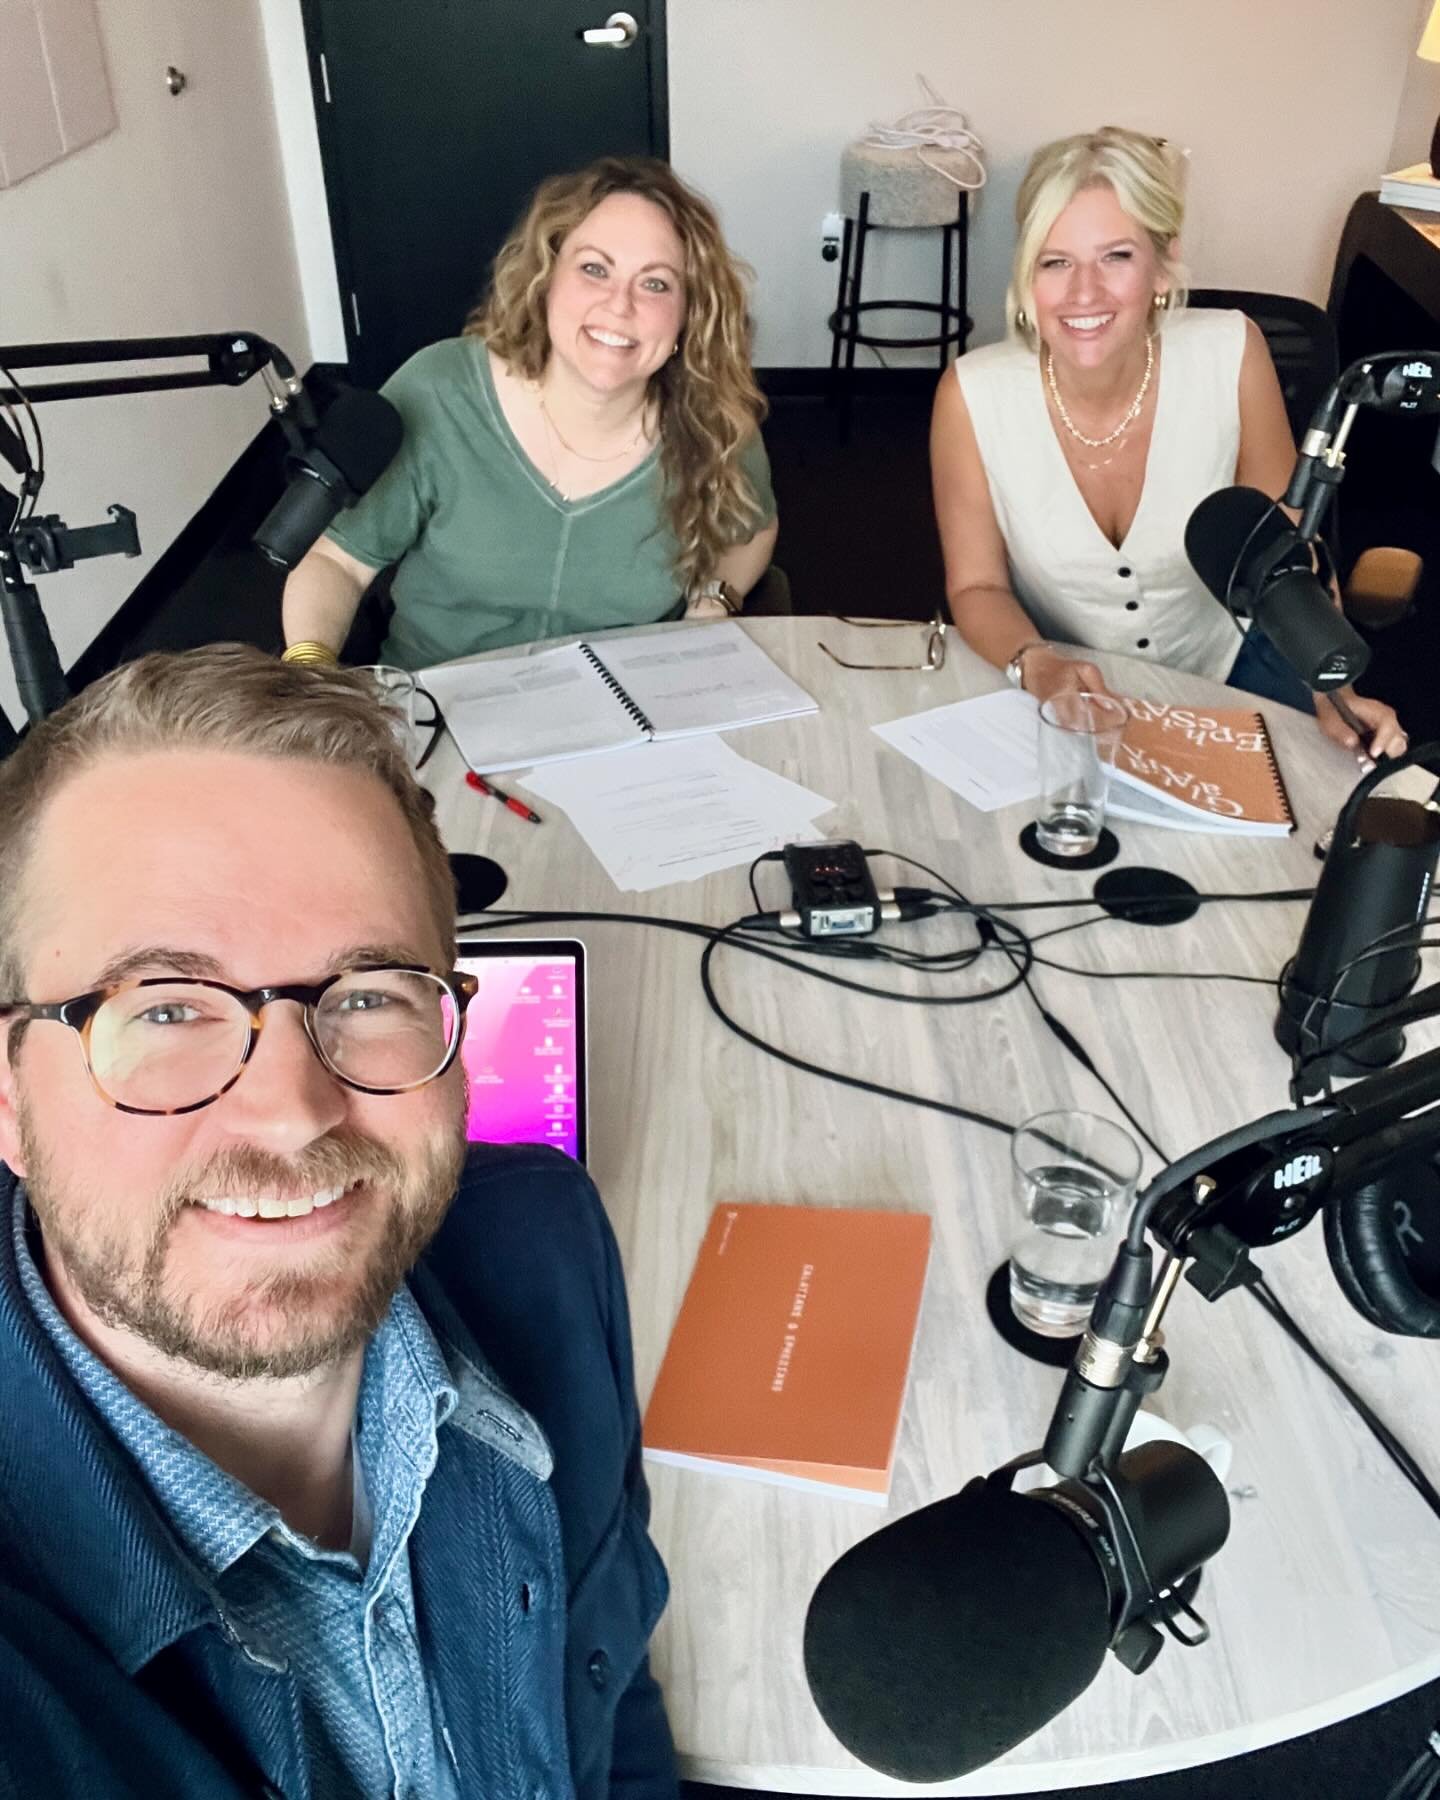 I had a blast today being a guest on the She Reads Truth Podcast! Huge thanks to Amanda, Raechel and their entire team for welcoming me. Such a cool company full of people who LOVE the Bible.

Note: My episode will air later this summer as part of th